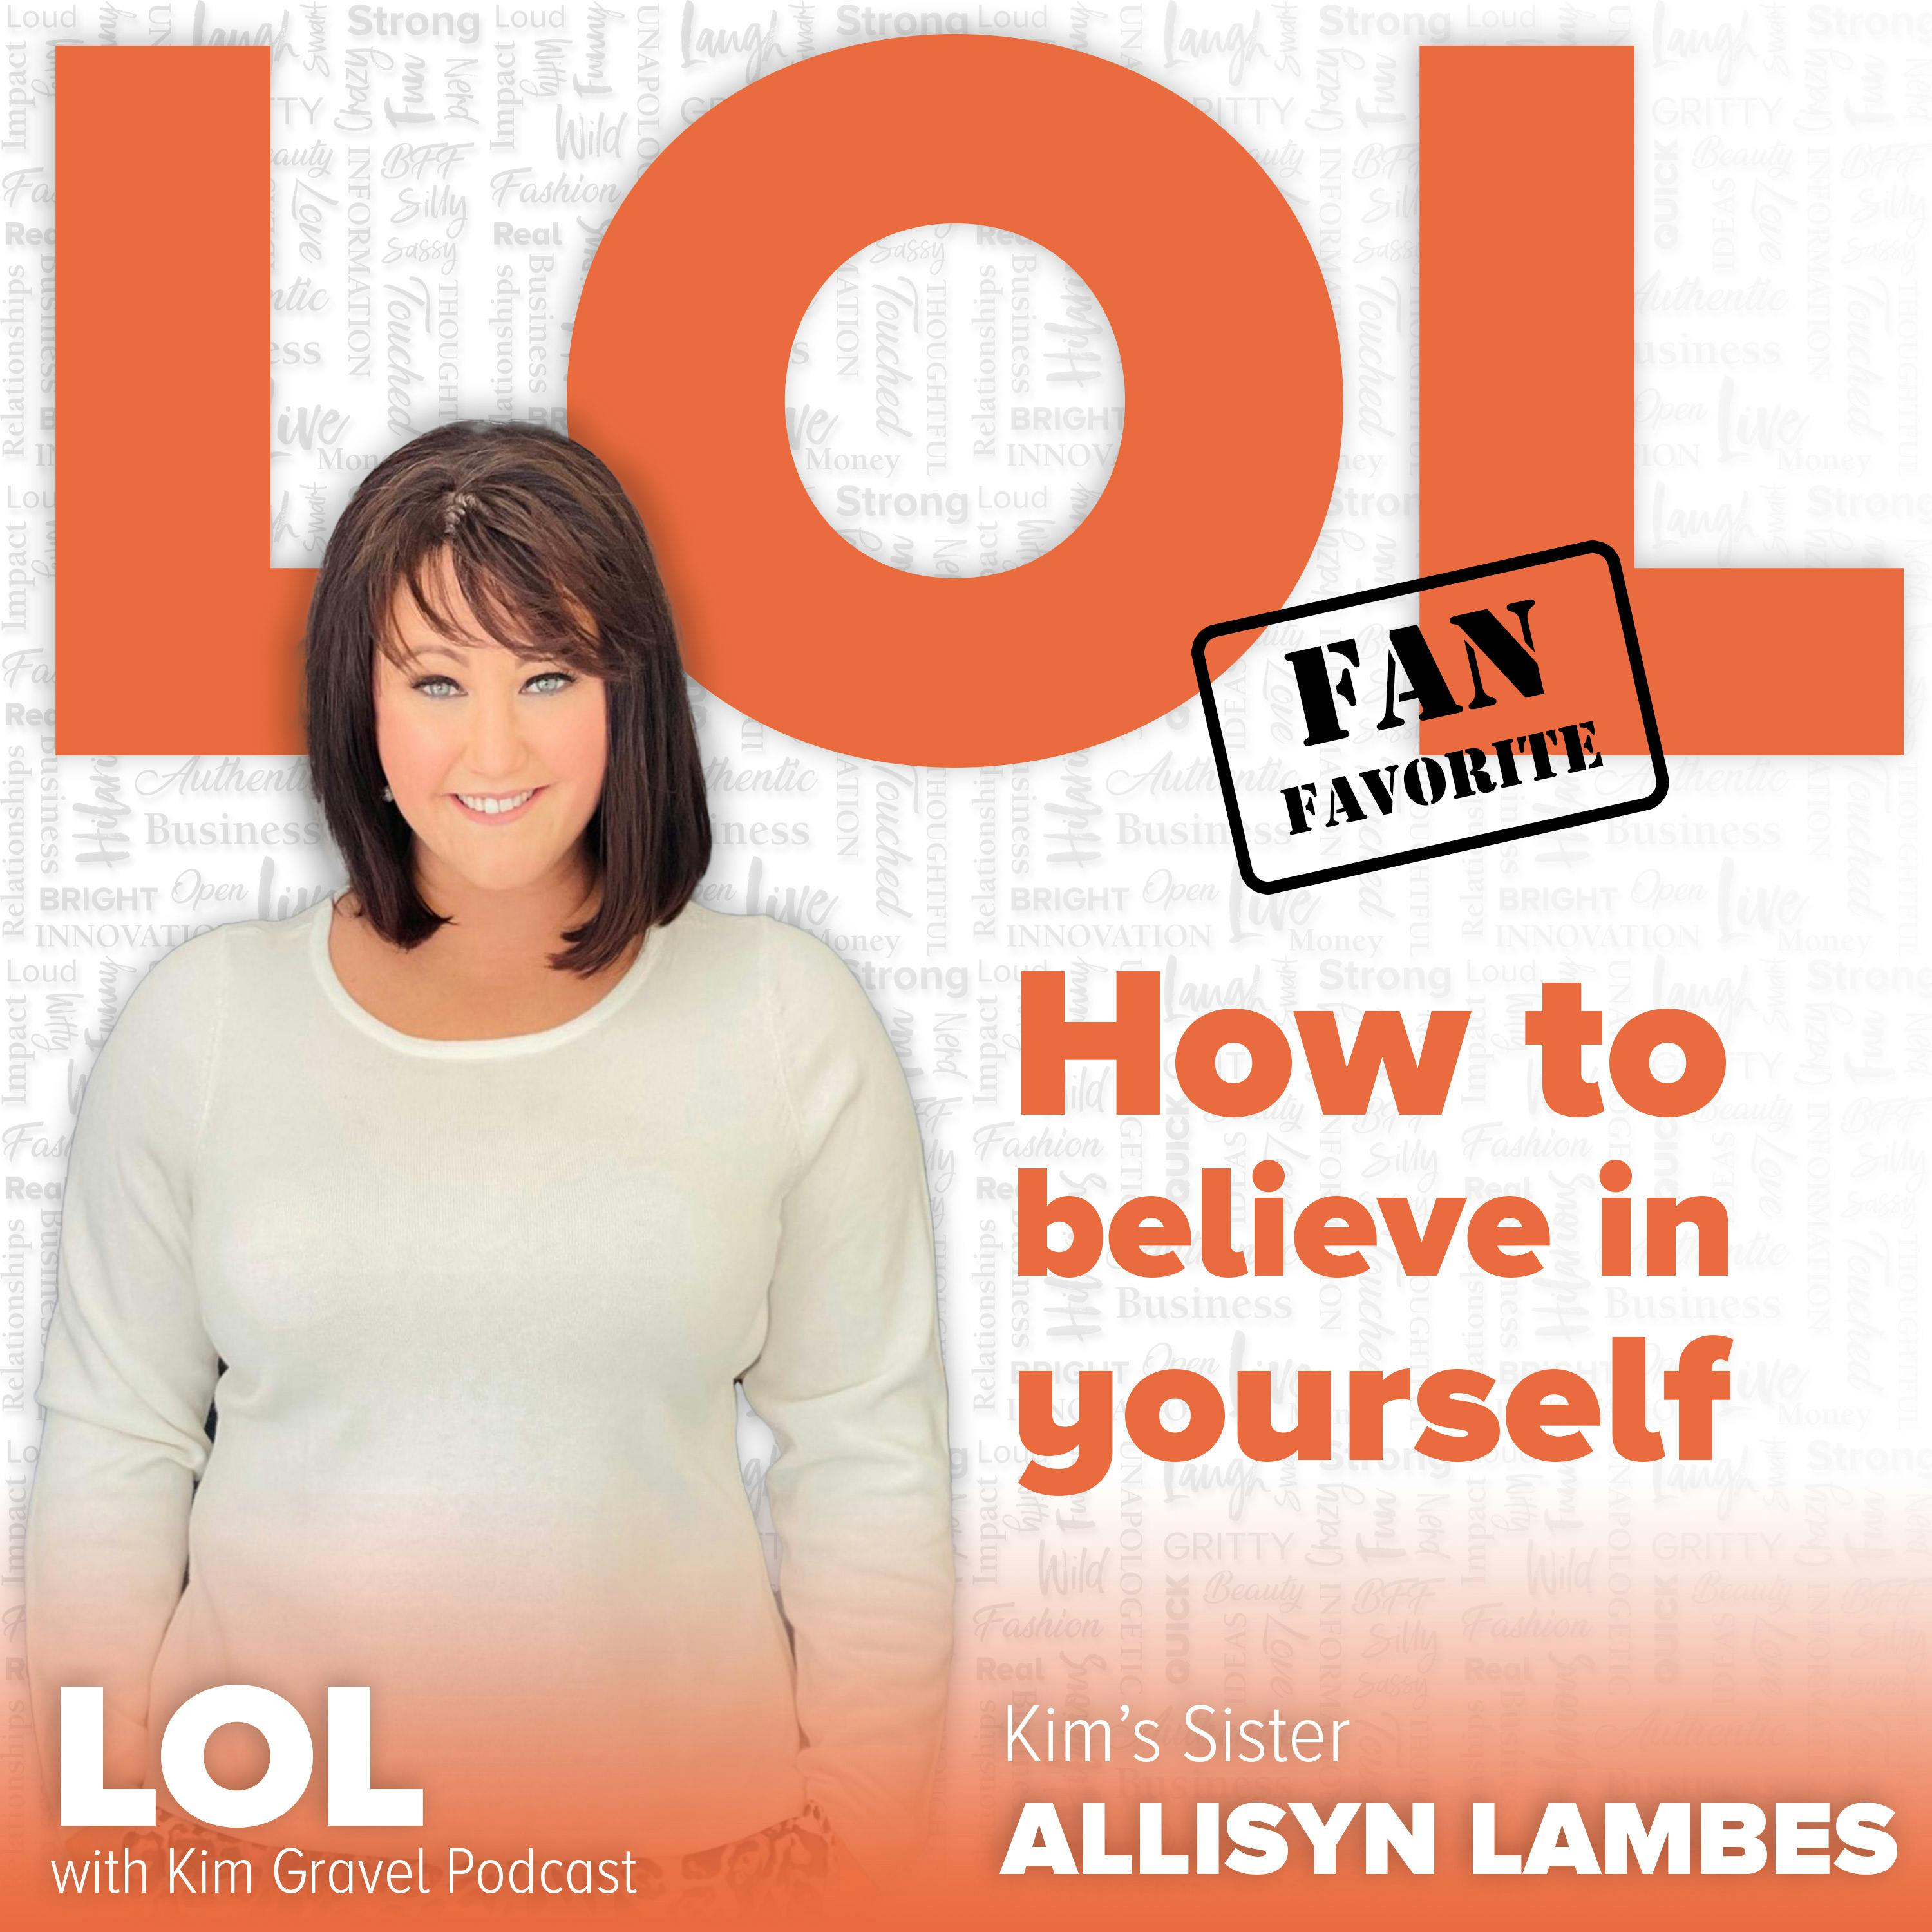 Fan Favorite! How to Believe in Yourself with Kim's Sister Allisyn Lambes Image